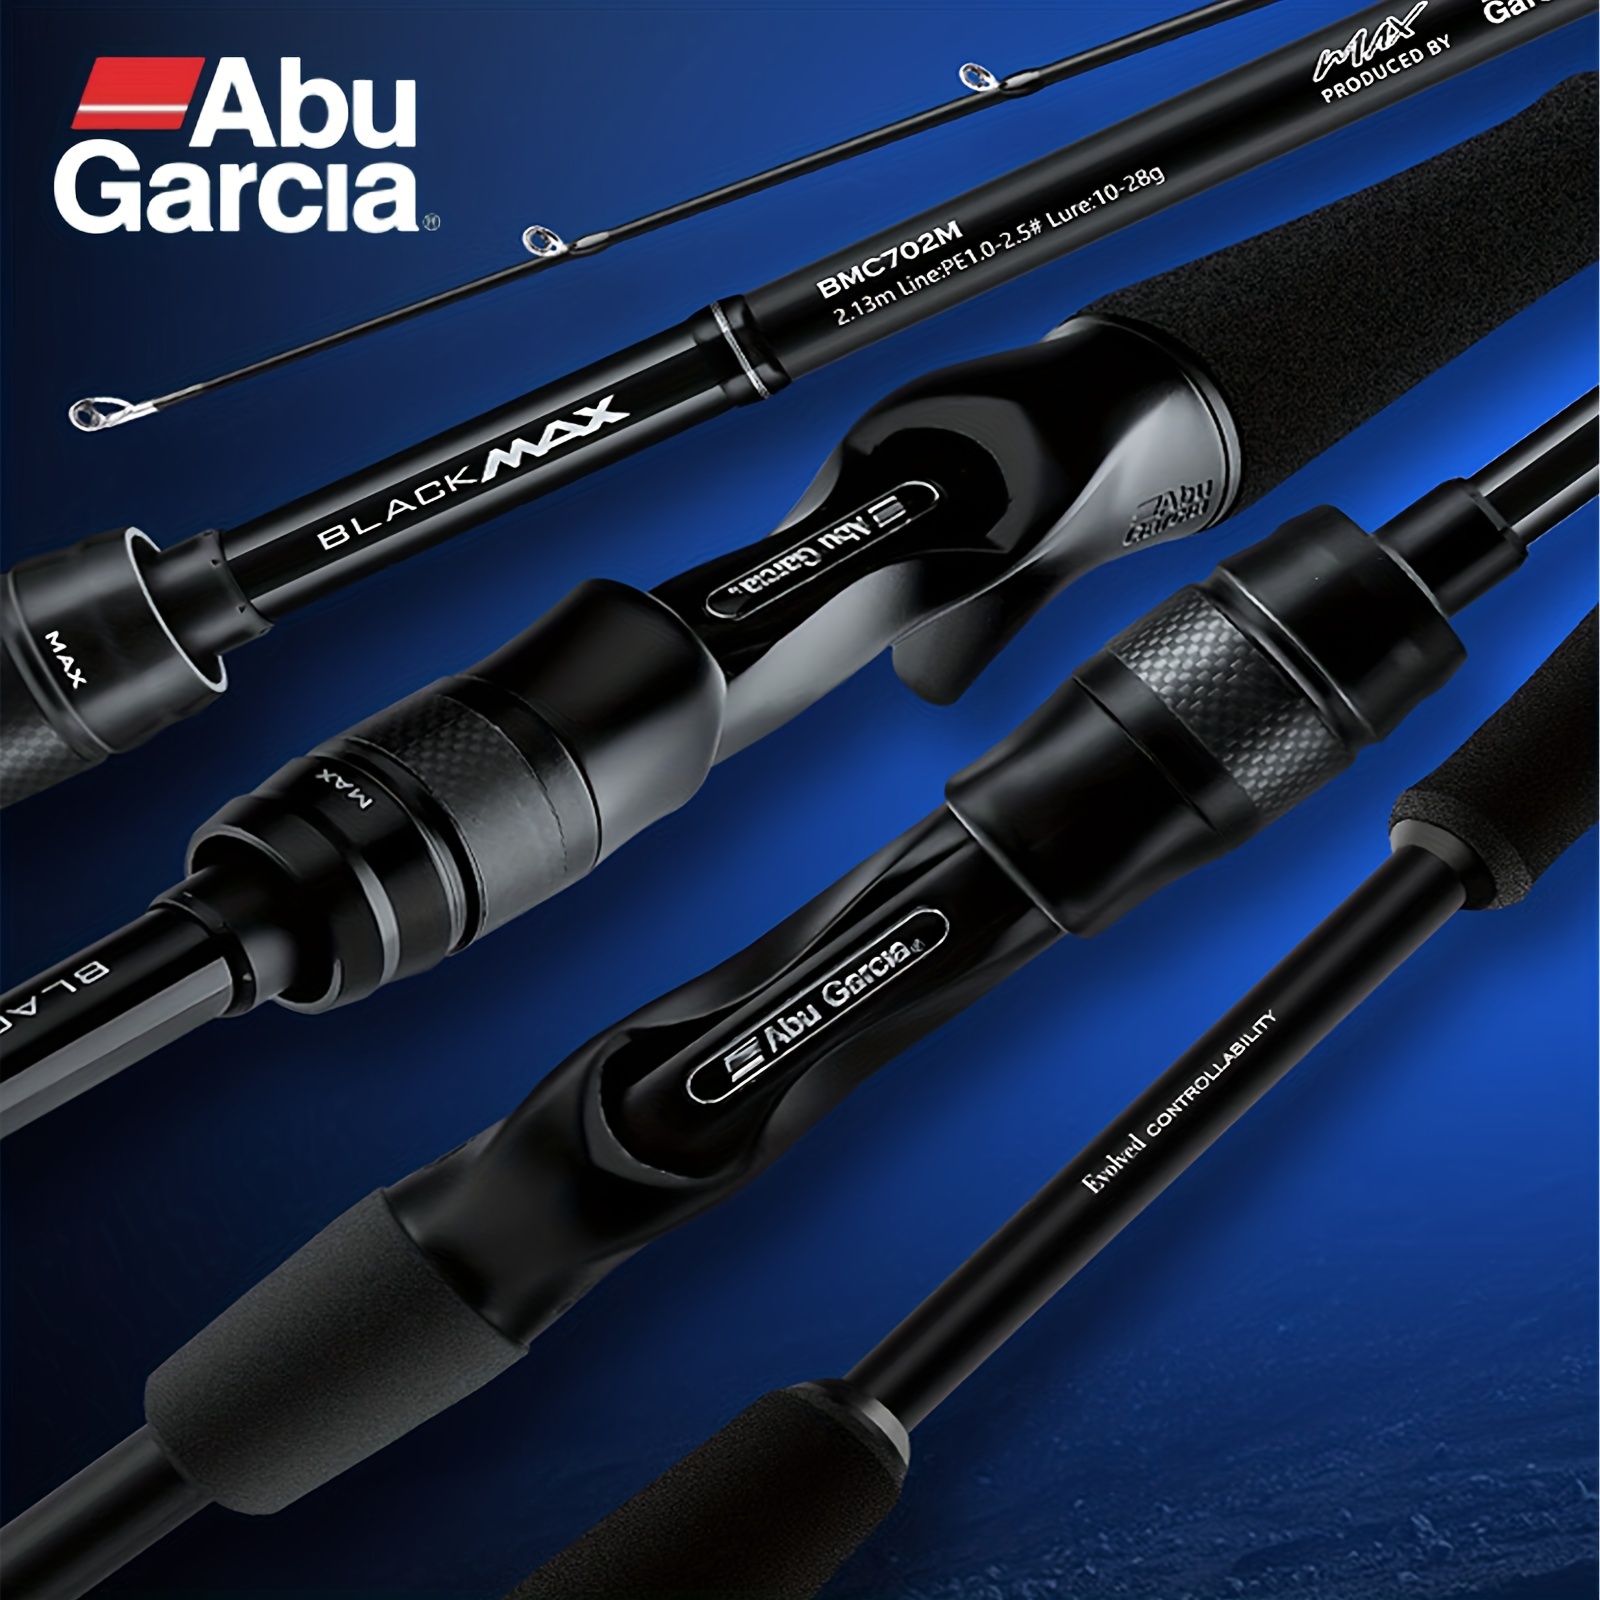 Abu Garcia BMAX 182.88-213.36cm Spinning/Casting Fishing Rod, Carbon Fiber  Casting/Spinning Fishing Rod With EVA Grip, High Sensitivity, Suitable For